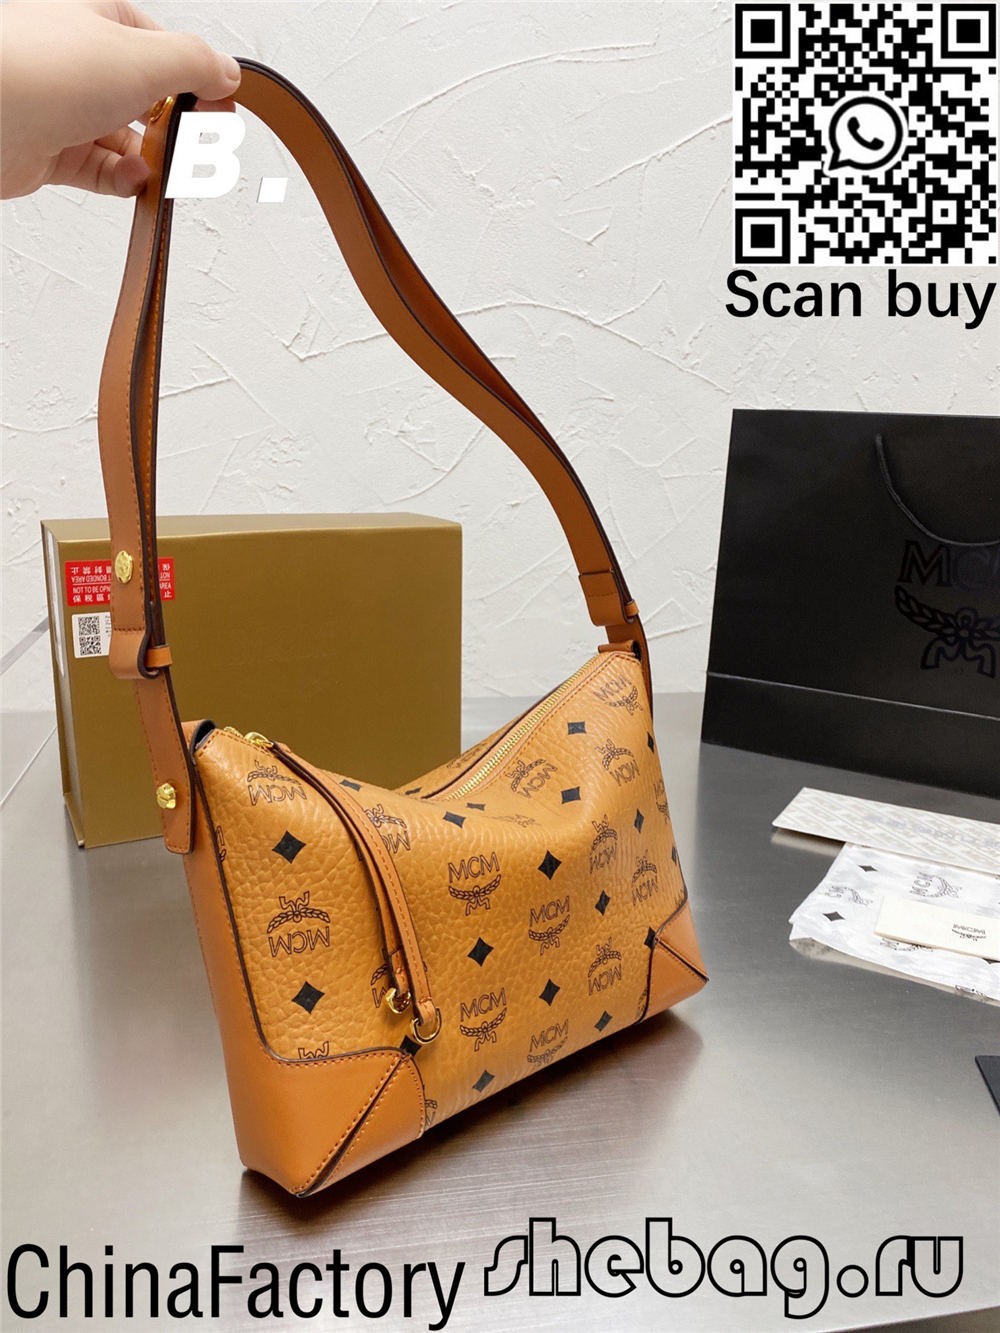 How many of the most worthwhile MCM replica bags are there to buy? (2022 latest)-Best Quality Fake Louis Vuitton Bag Online Store, Replica designer bag ru